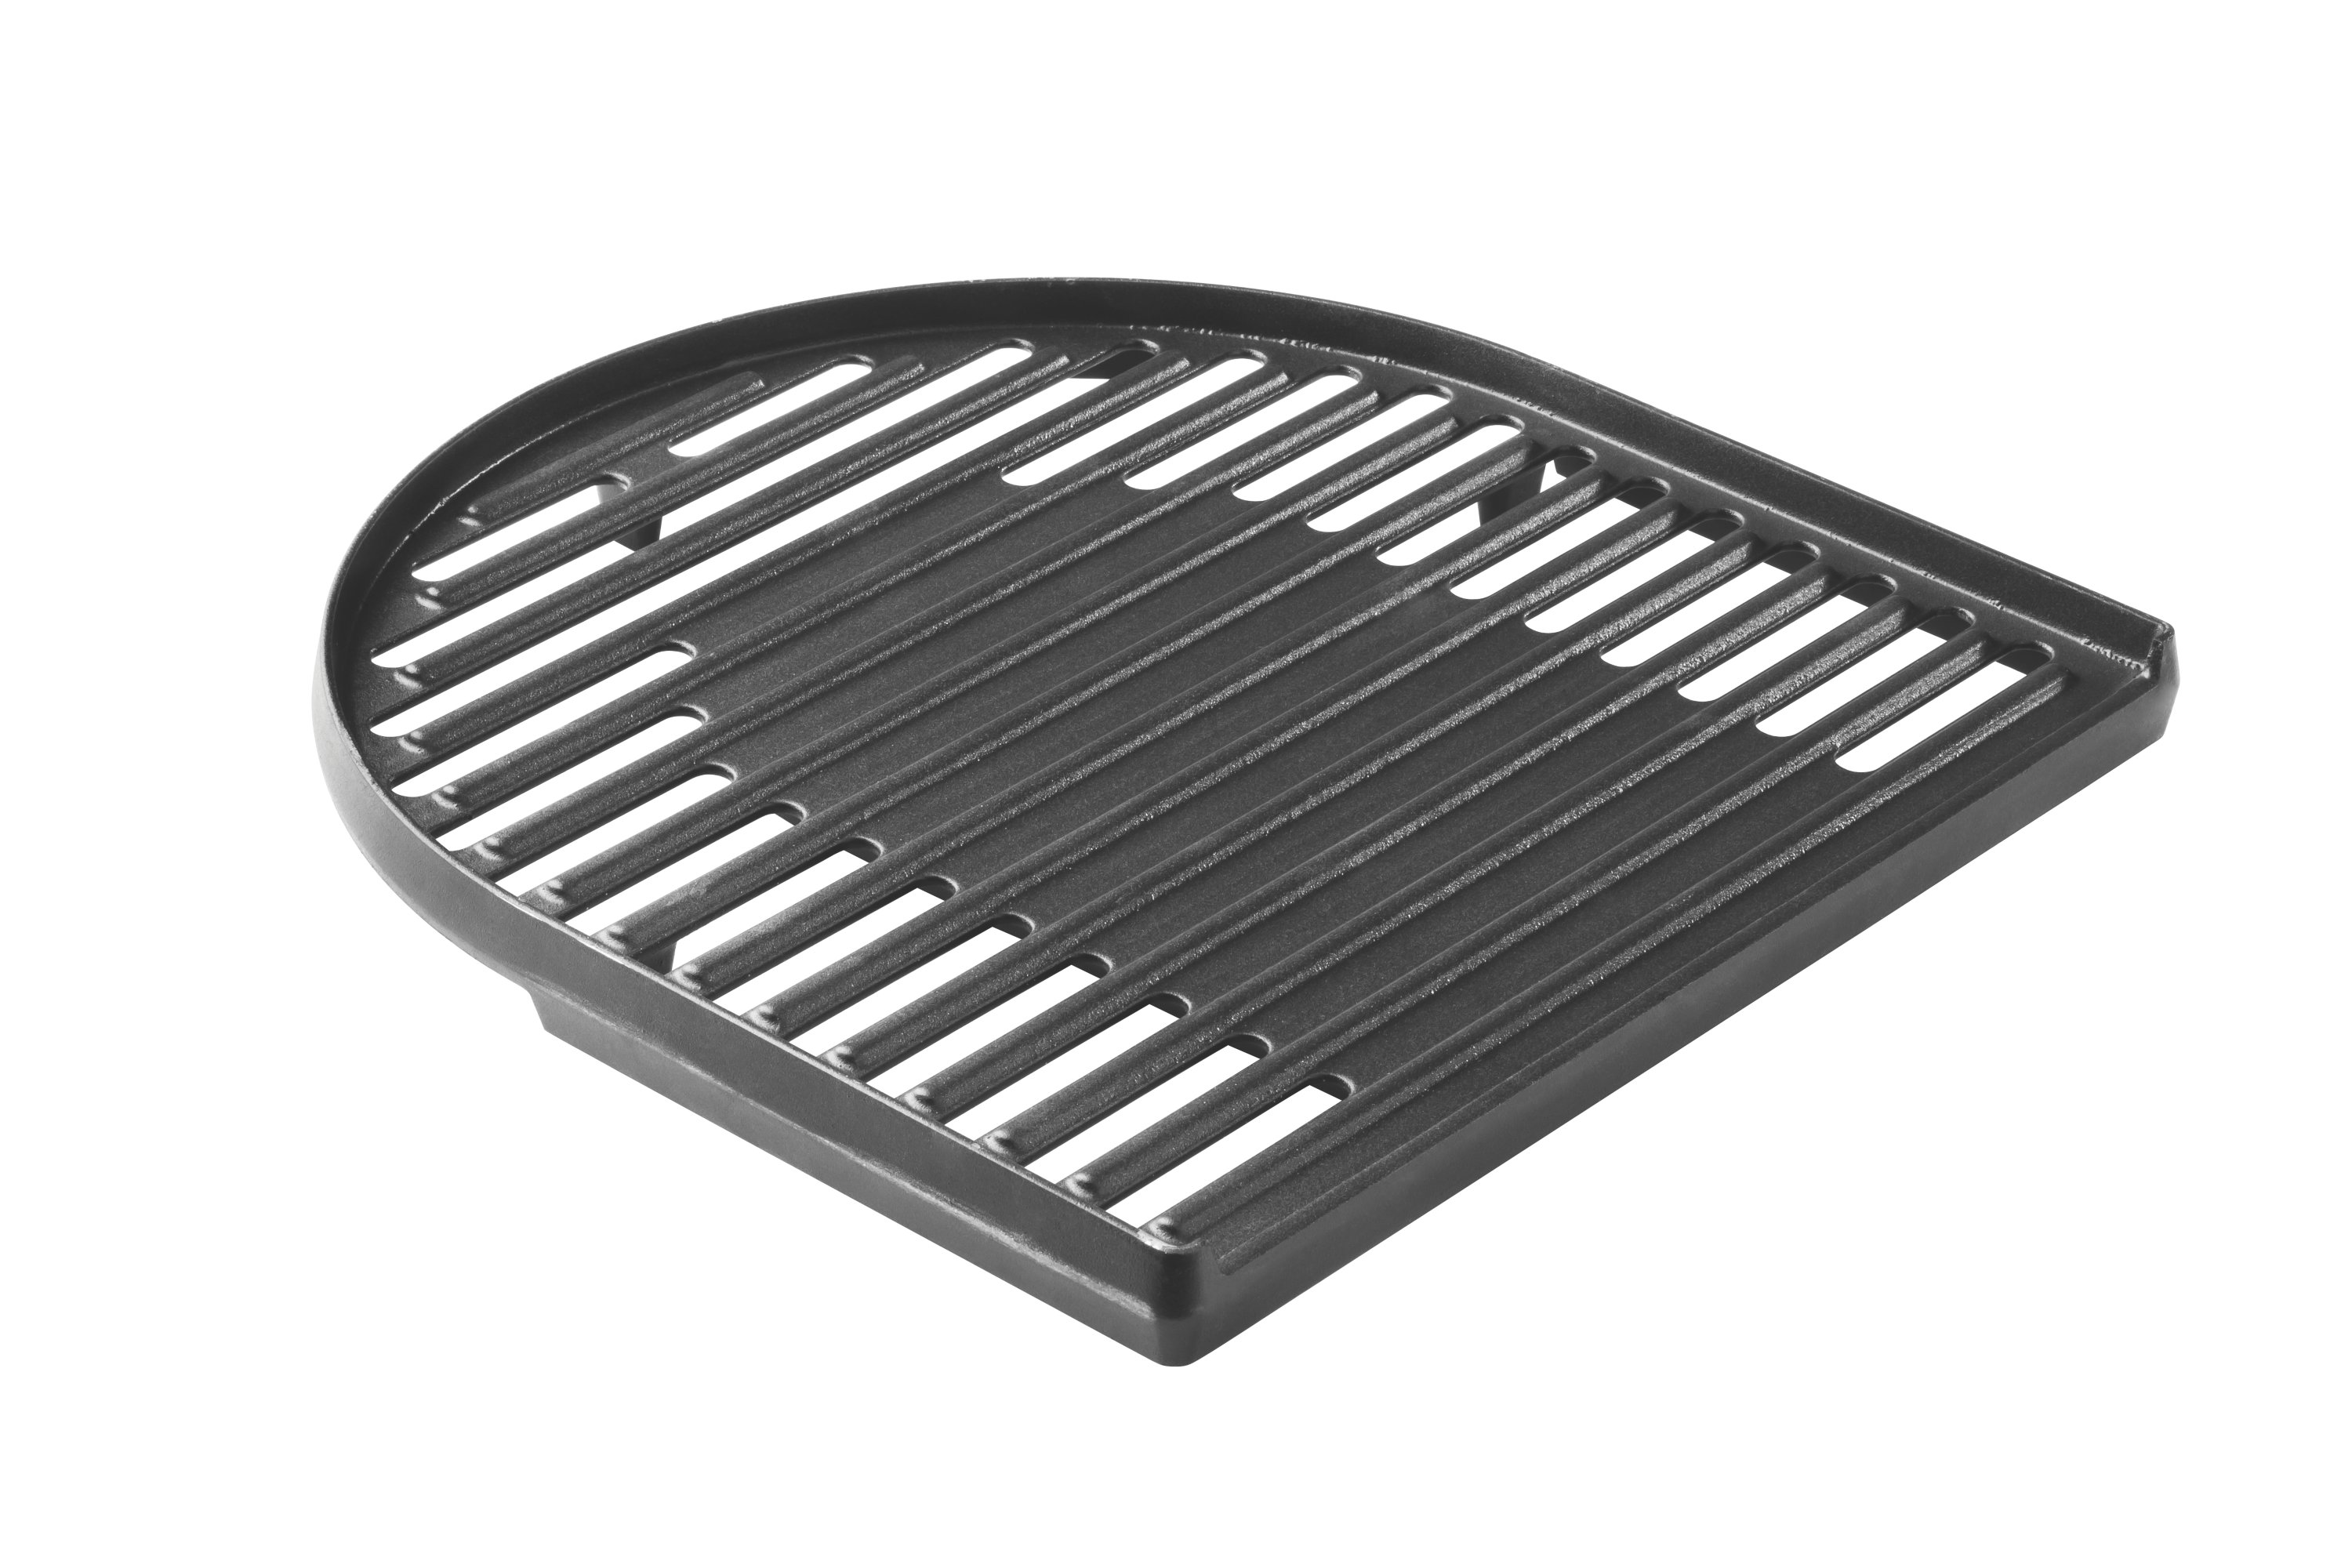 Cast Iron BBQ Grill Grate Plate 484 x 320 and 484 x 400 mm Cooking Camping Camp